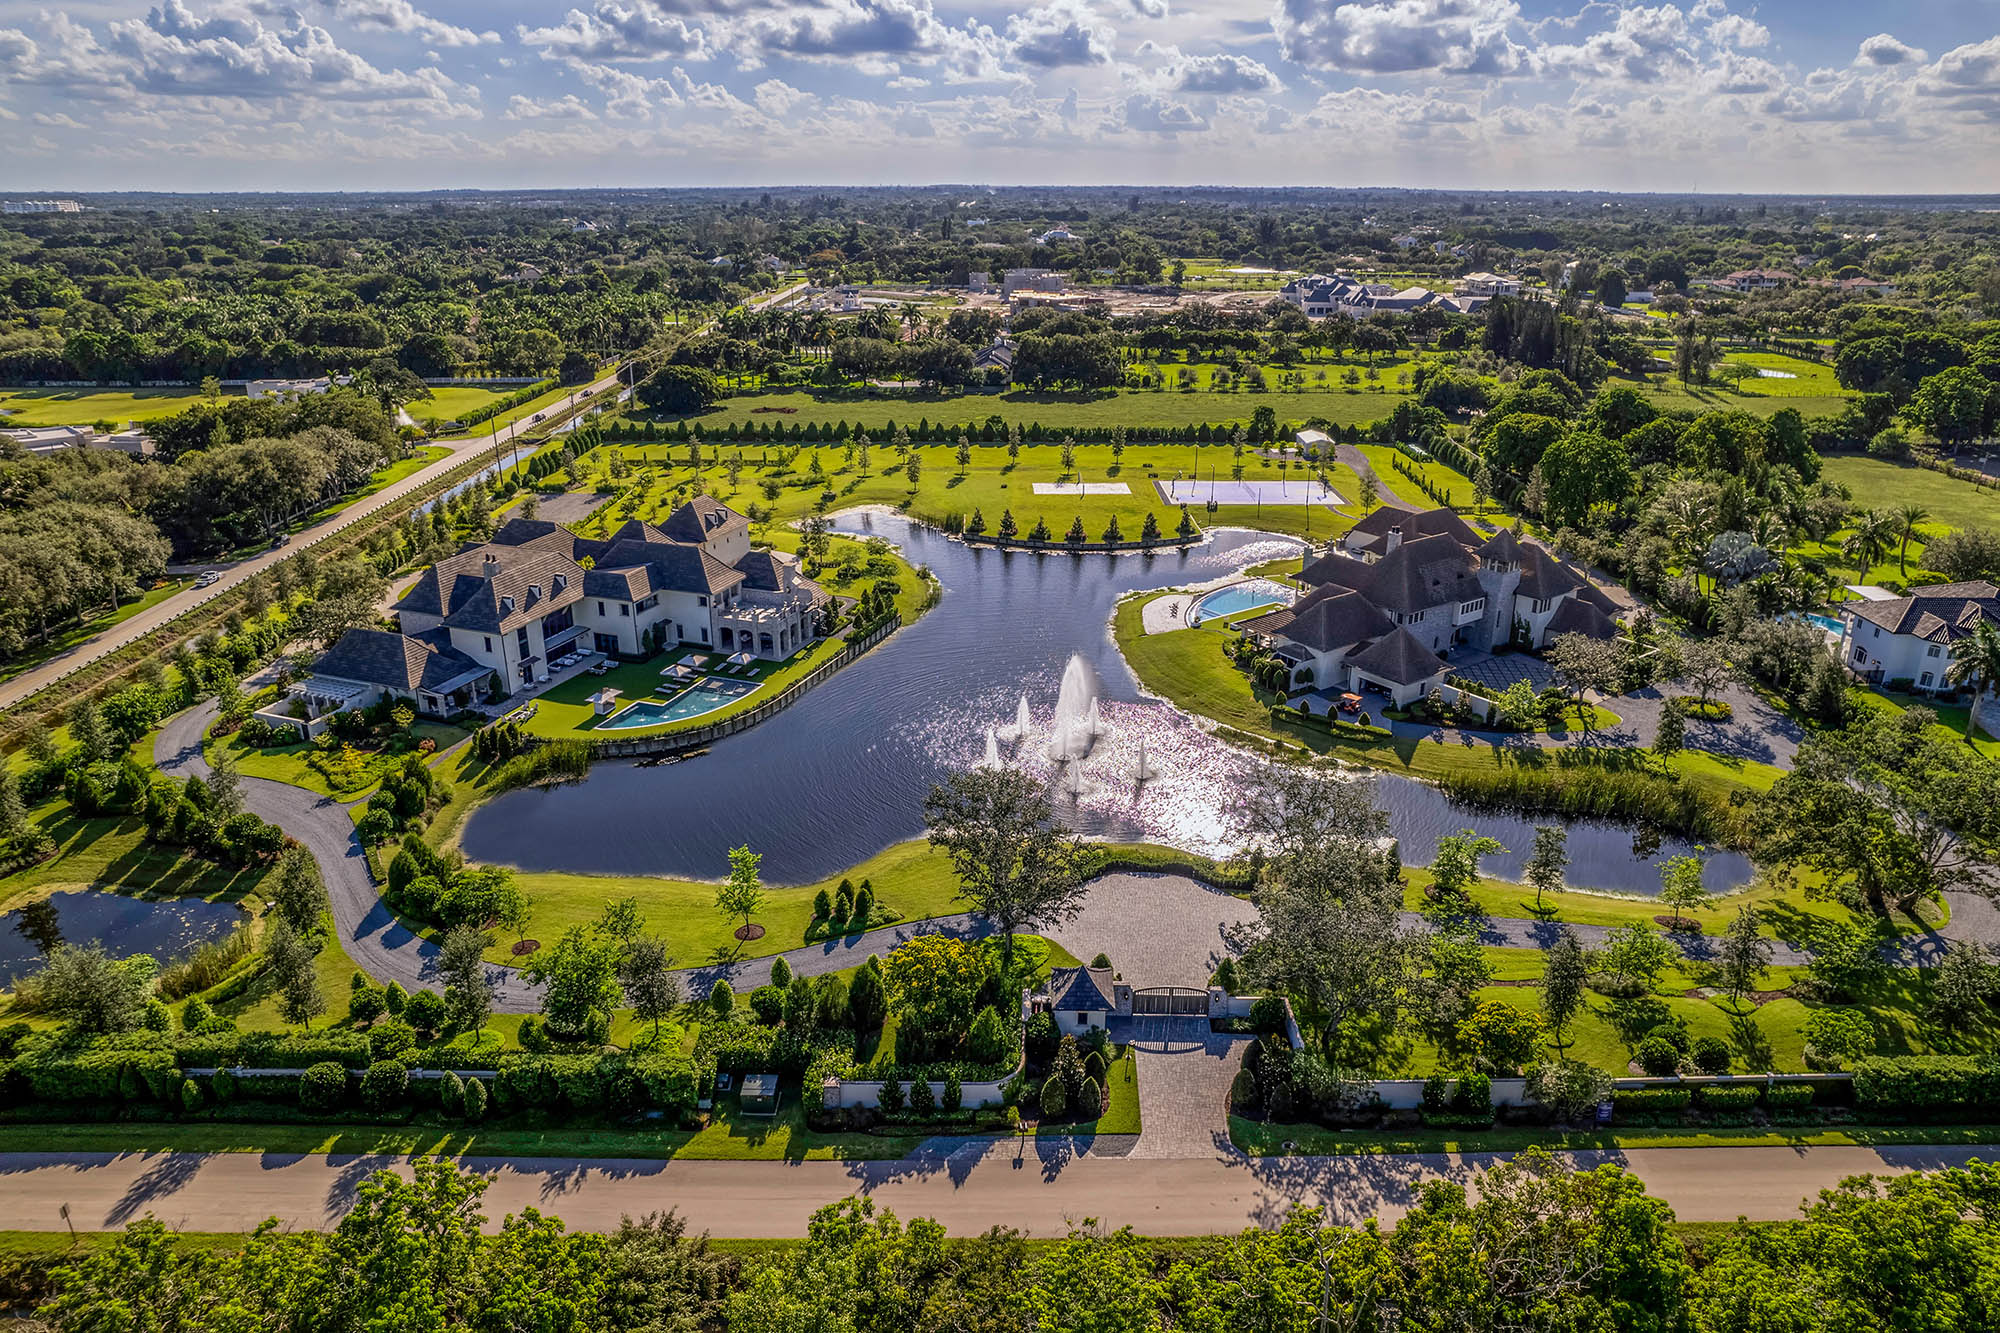 Drone pictures show the two French country-style mansions built side by side for identical twins which are currently on the market for $54 million. Undated photograph. (The Jills Zeder Group,1 Oak Studios,SWNS/Zenger)